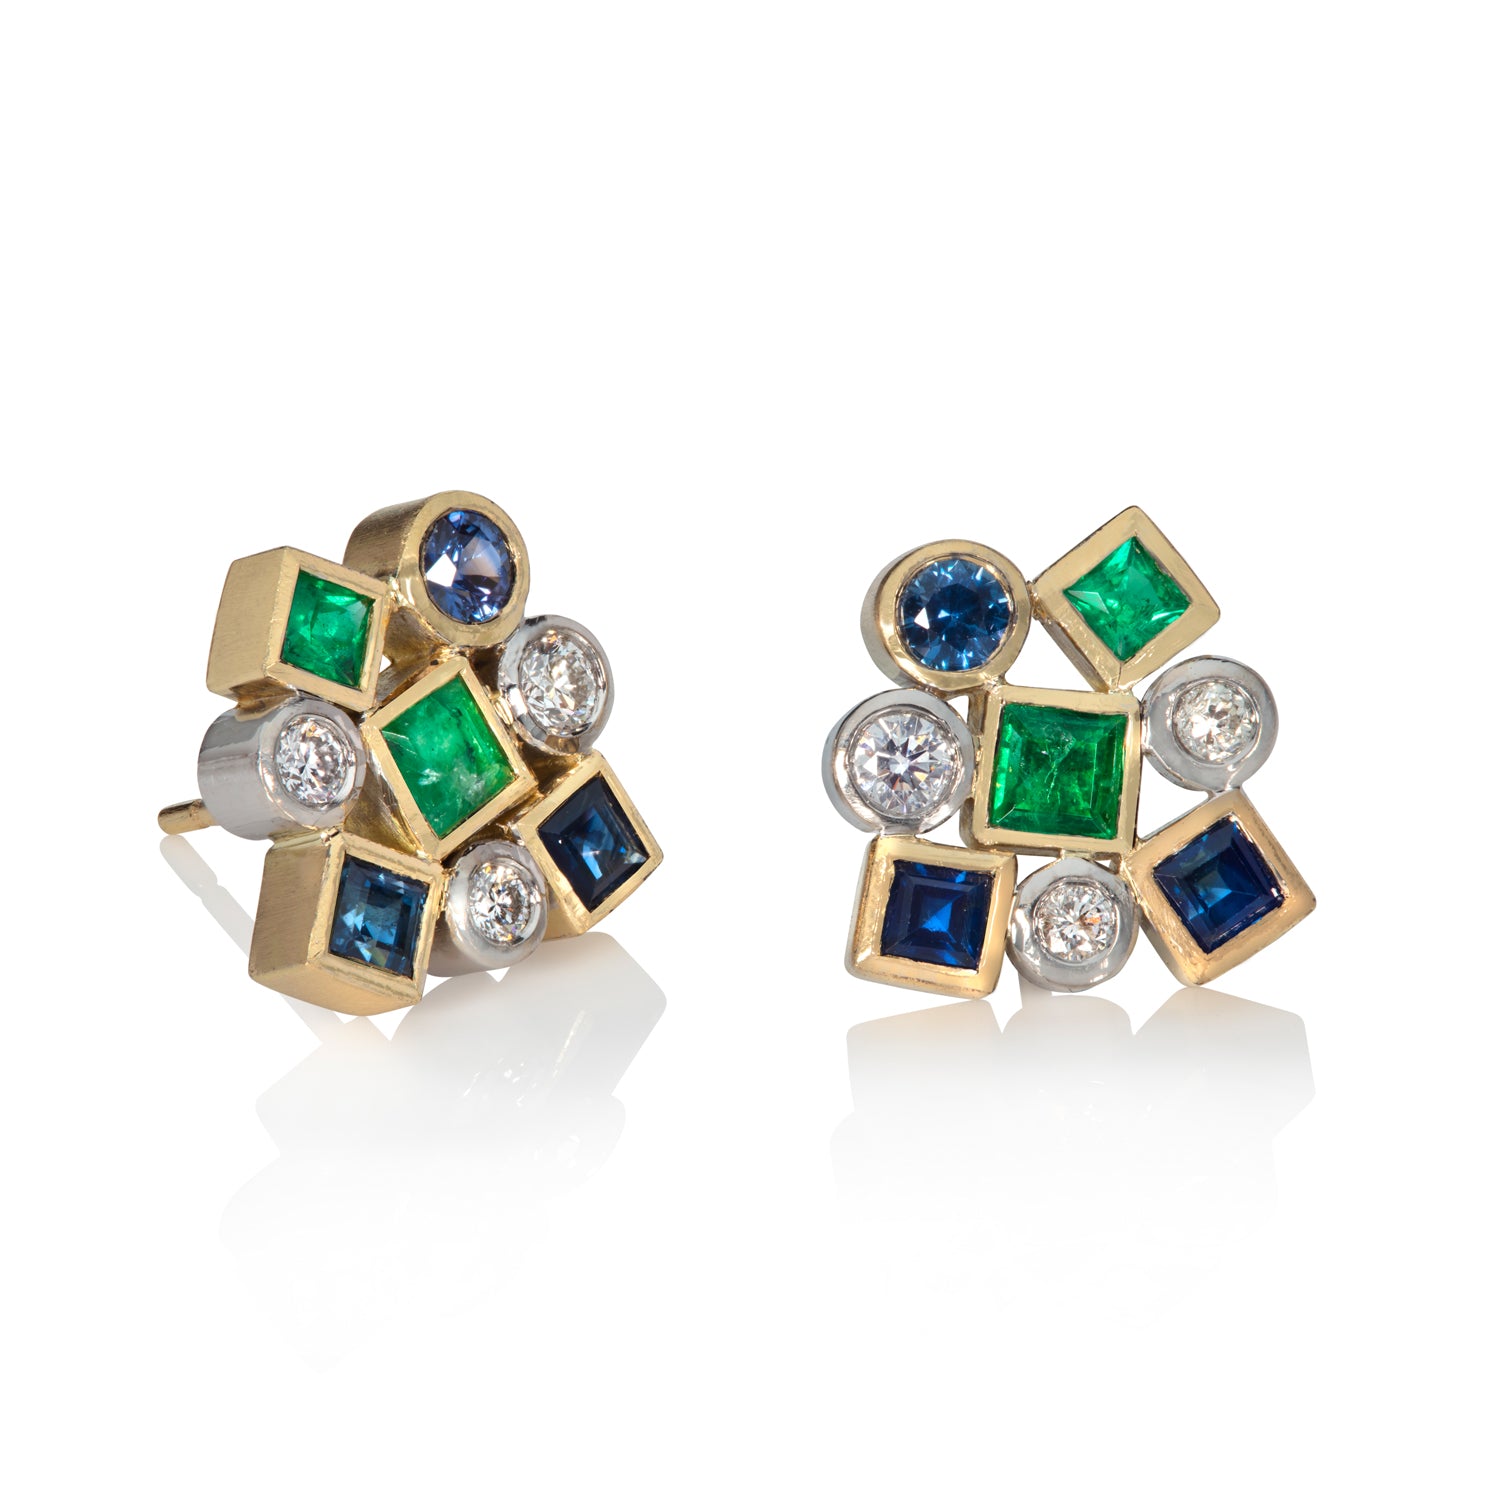 Sapphire, Emerald and diamond cluster earrings on white background